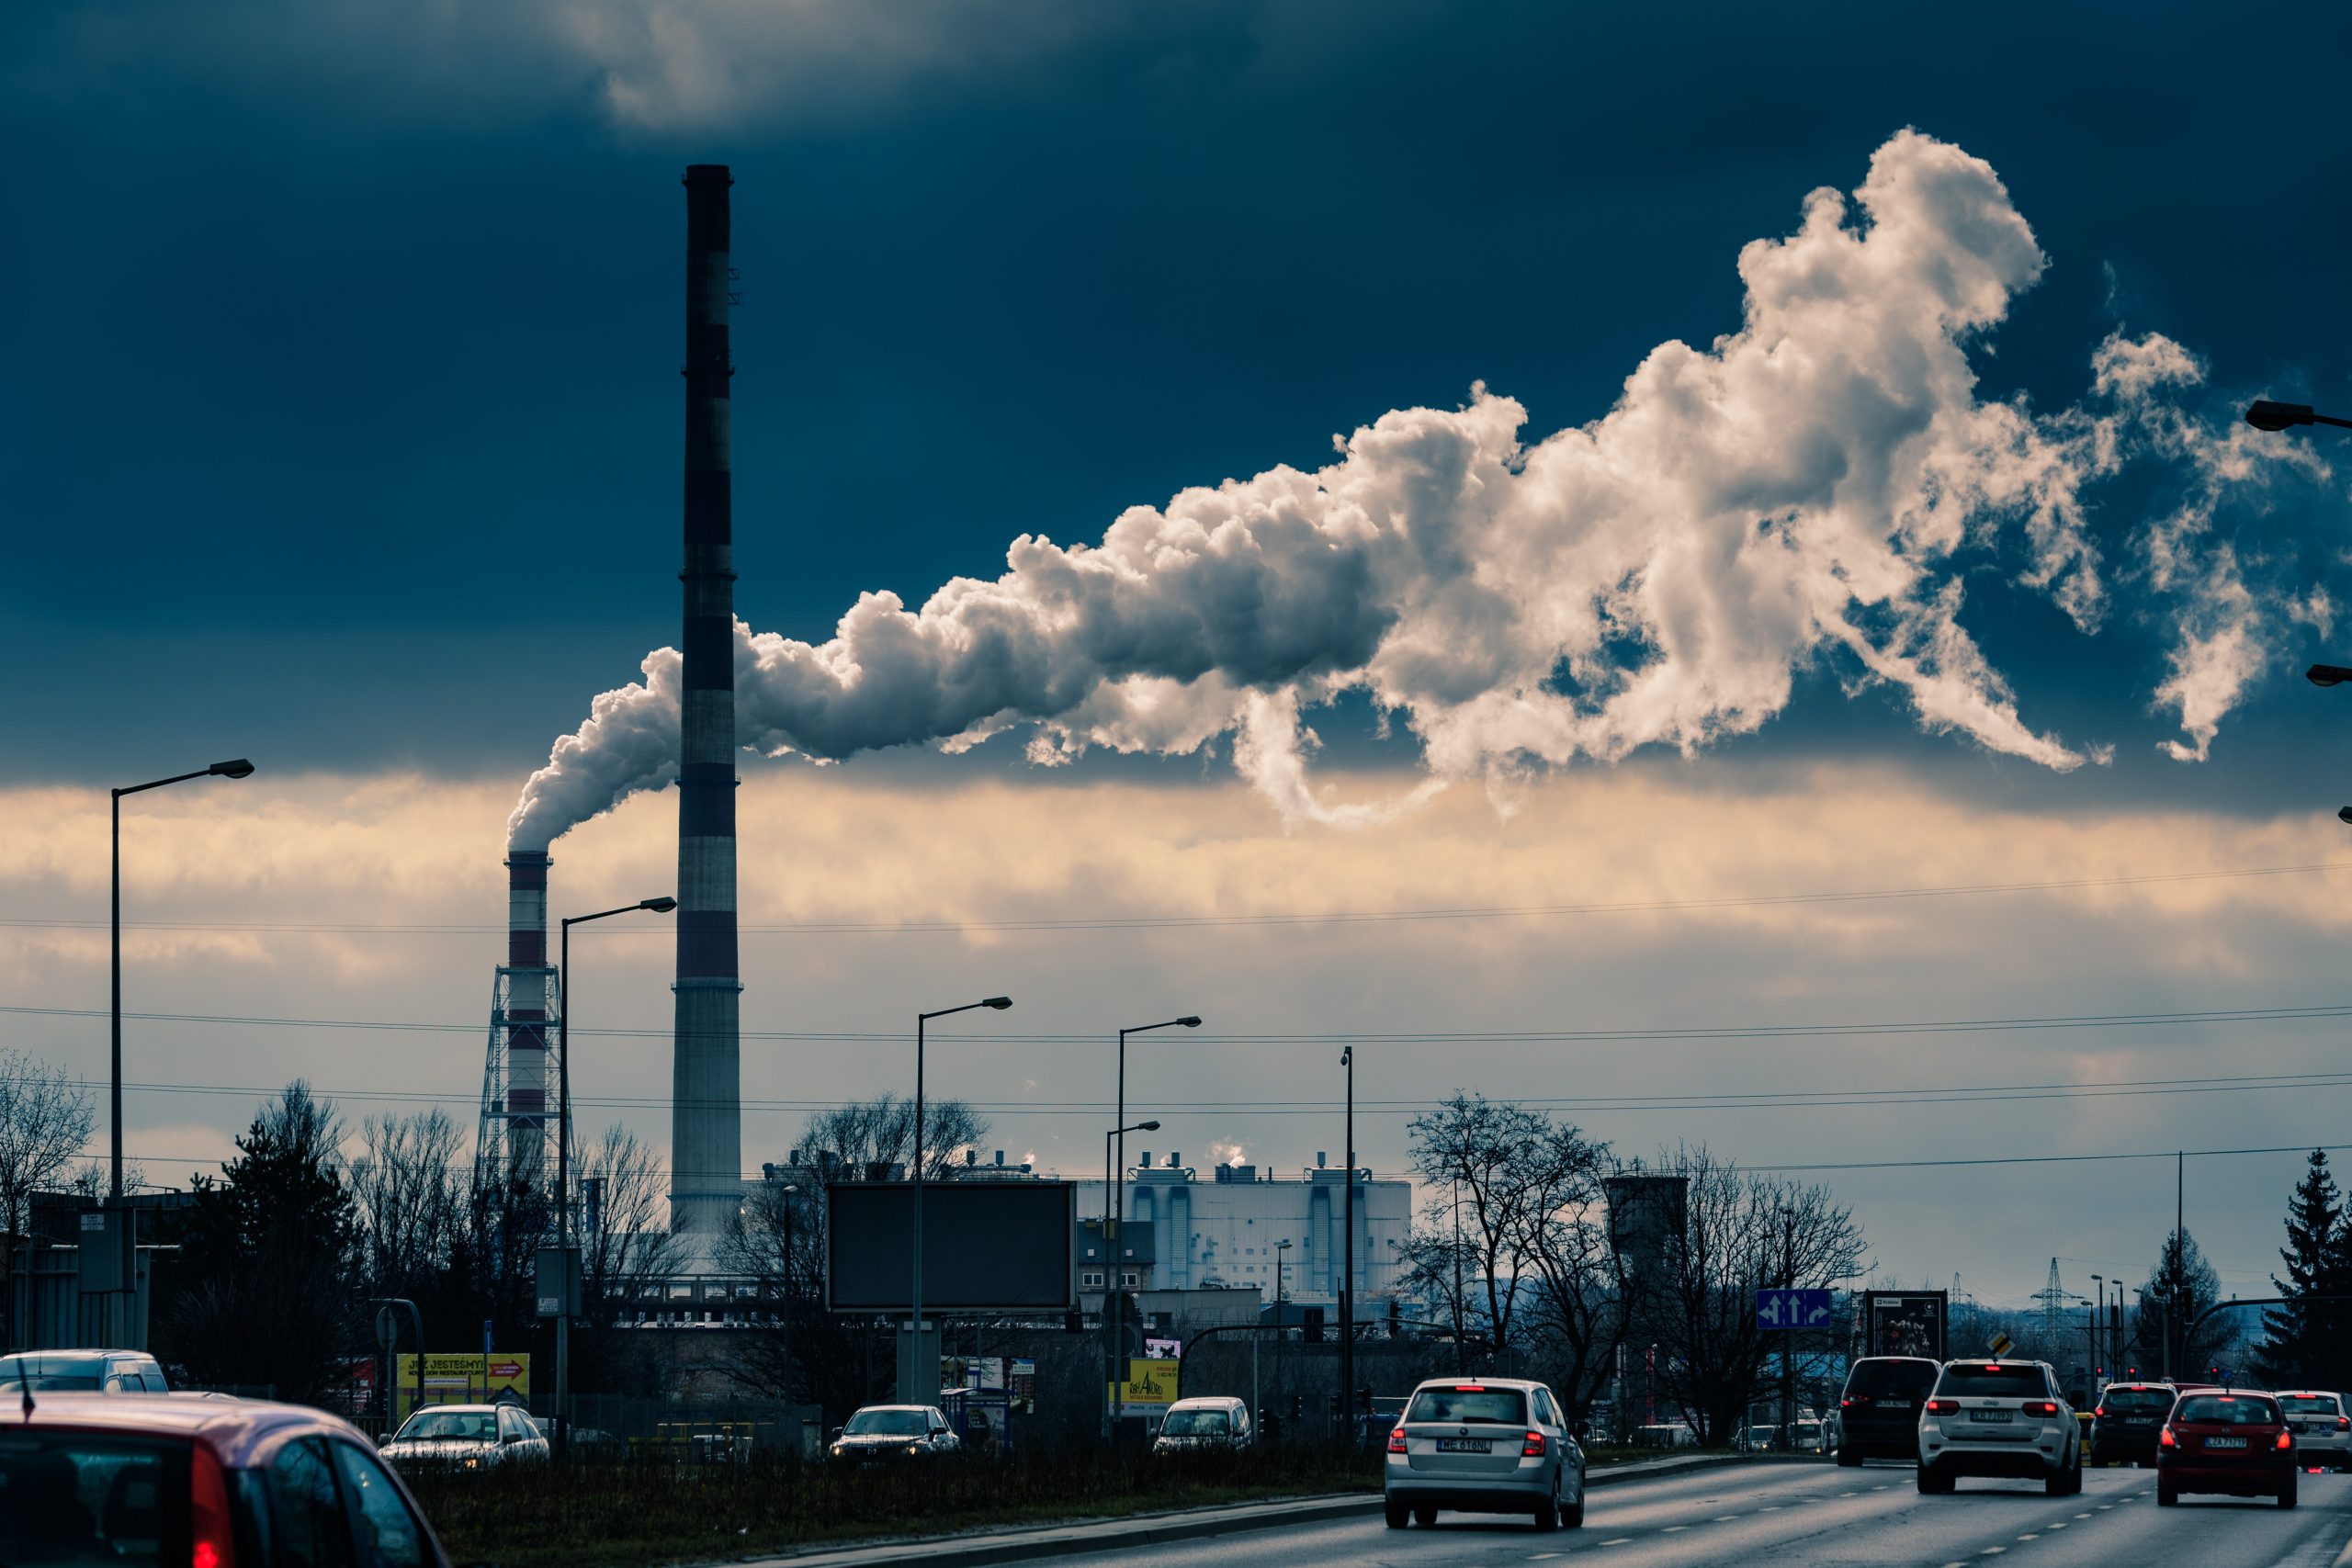 The Effects of Air Pollution Exposure on Employee Health and Productivity